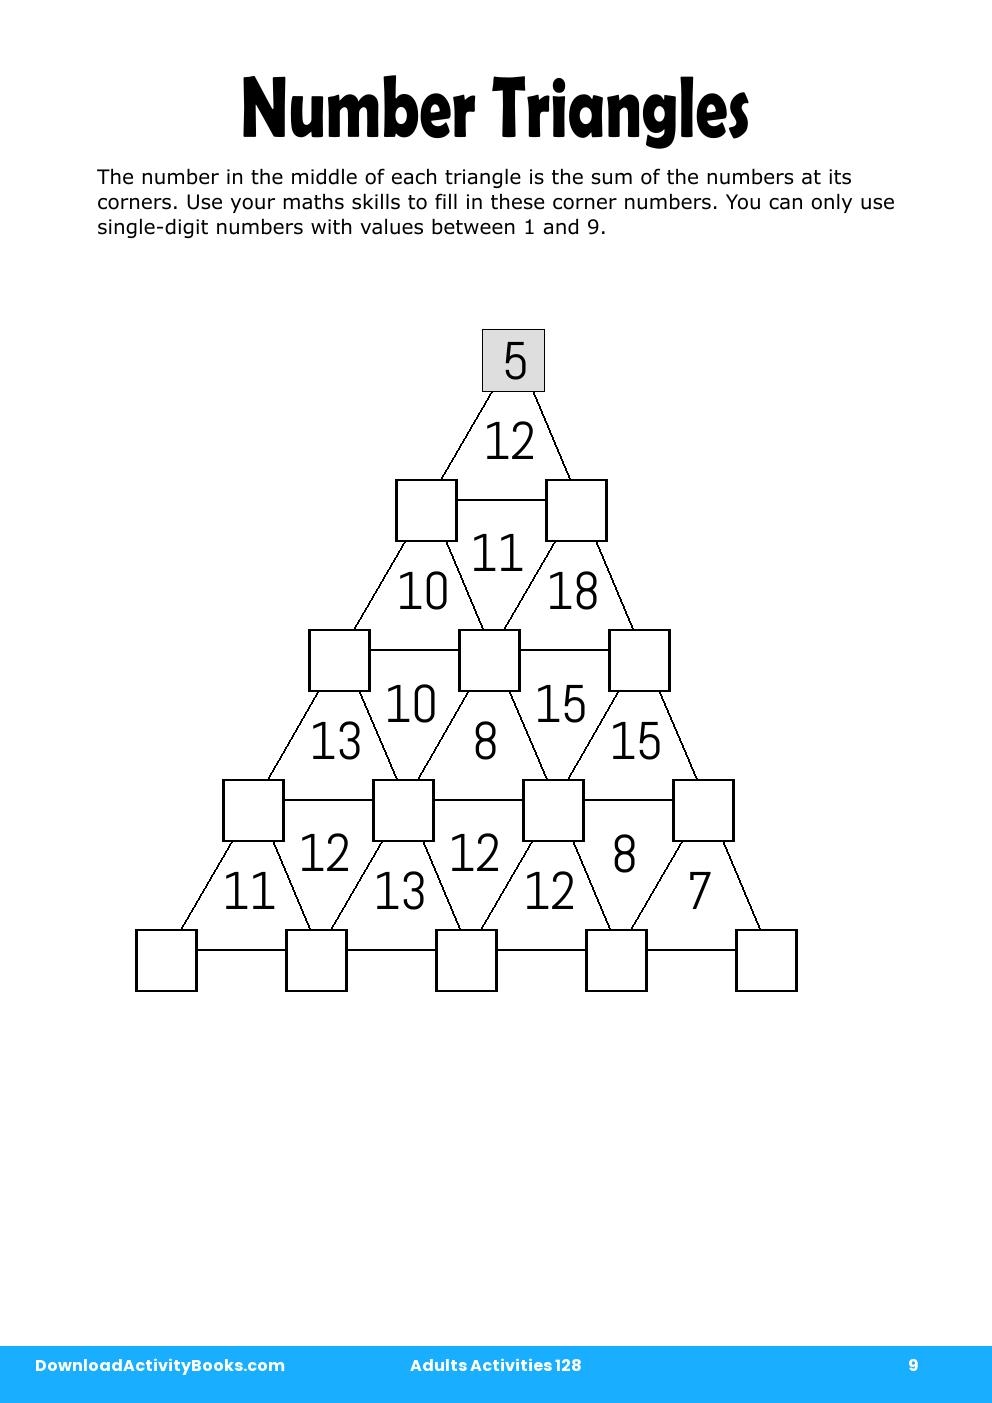 Number Triangles in Adults Activities 128